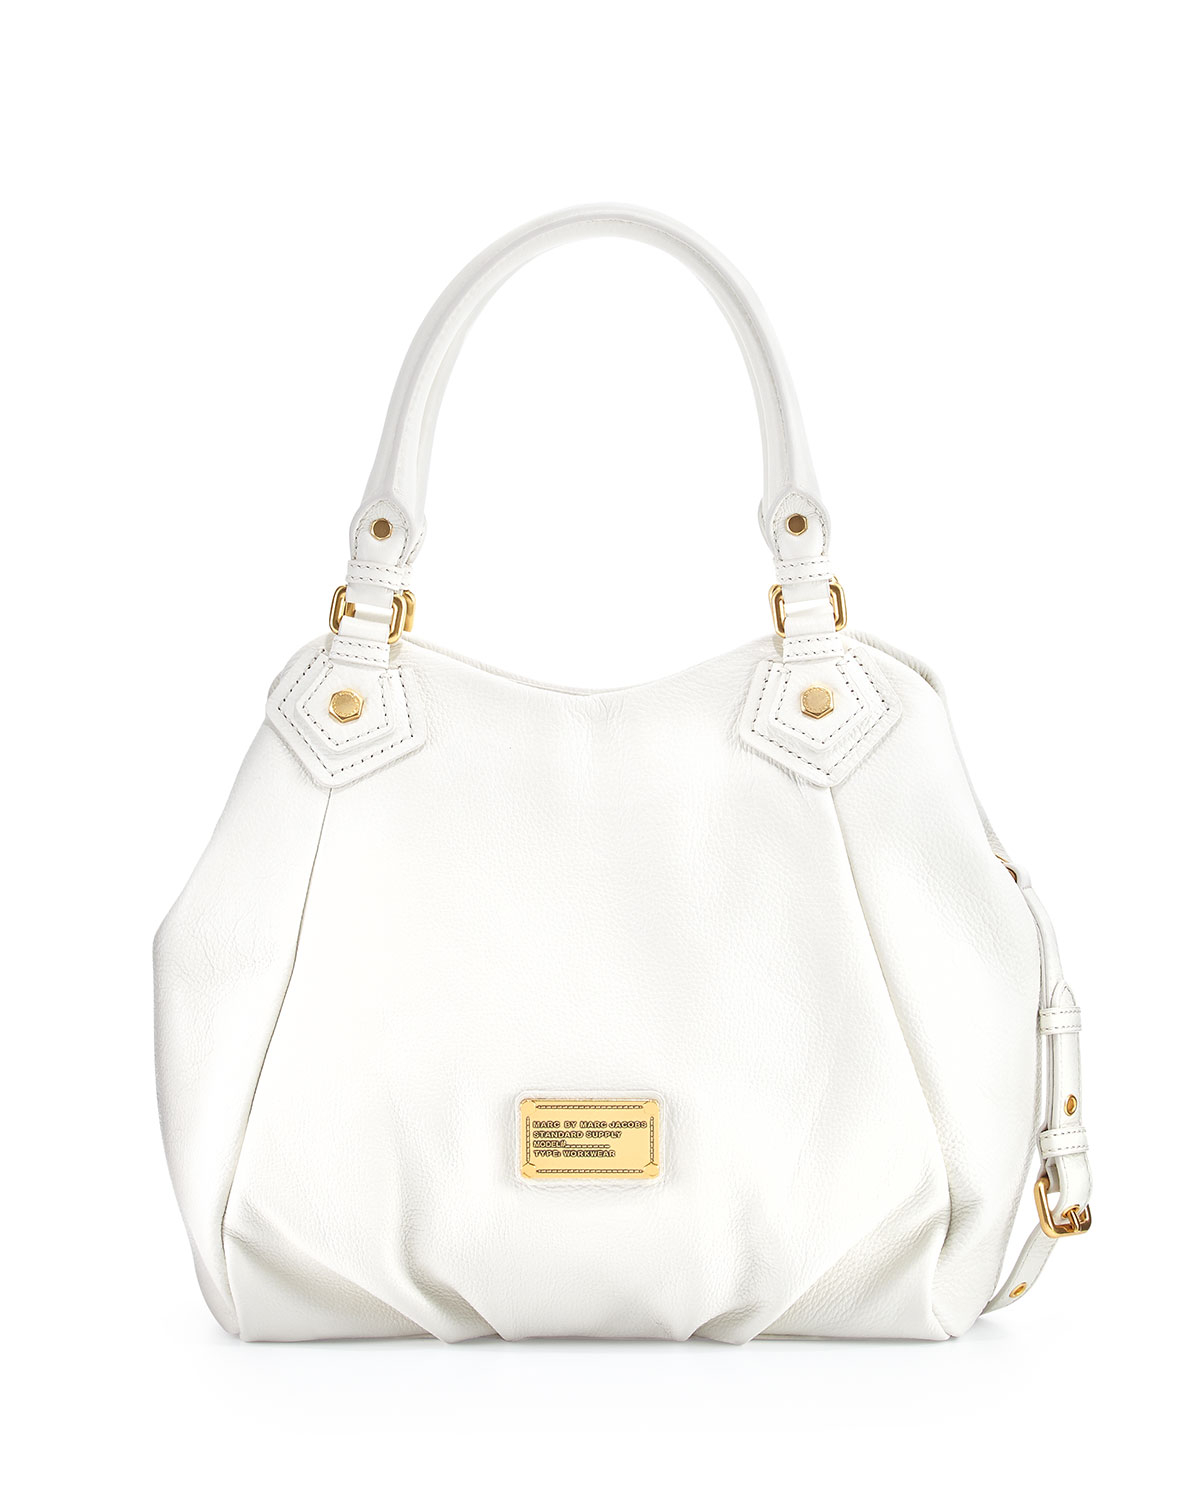 Lyst - Marc By Marc Jacobs Classic Q Fran Satchel Bag in White